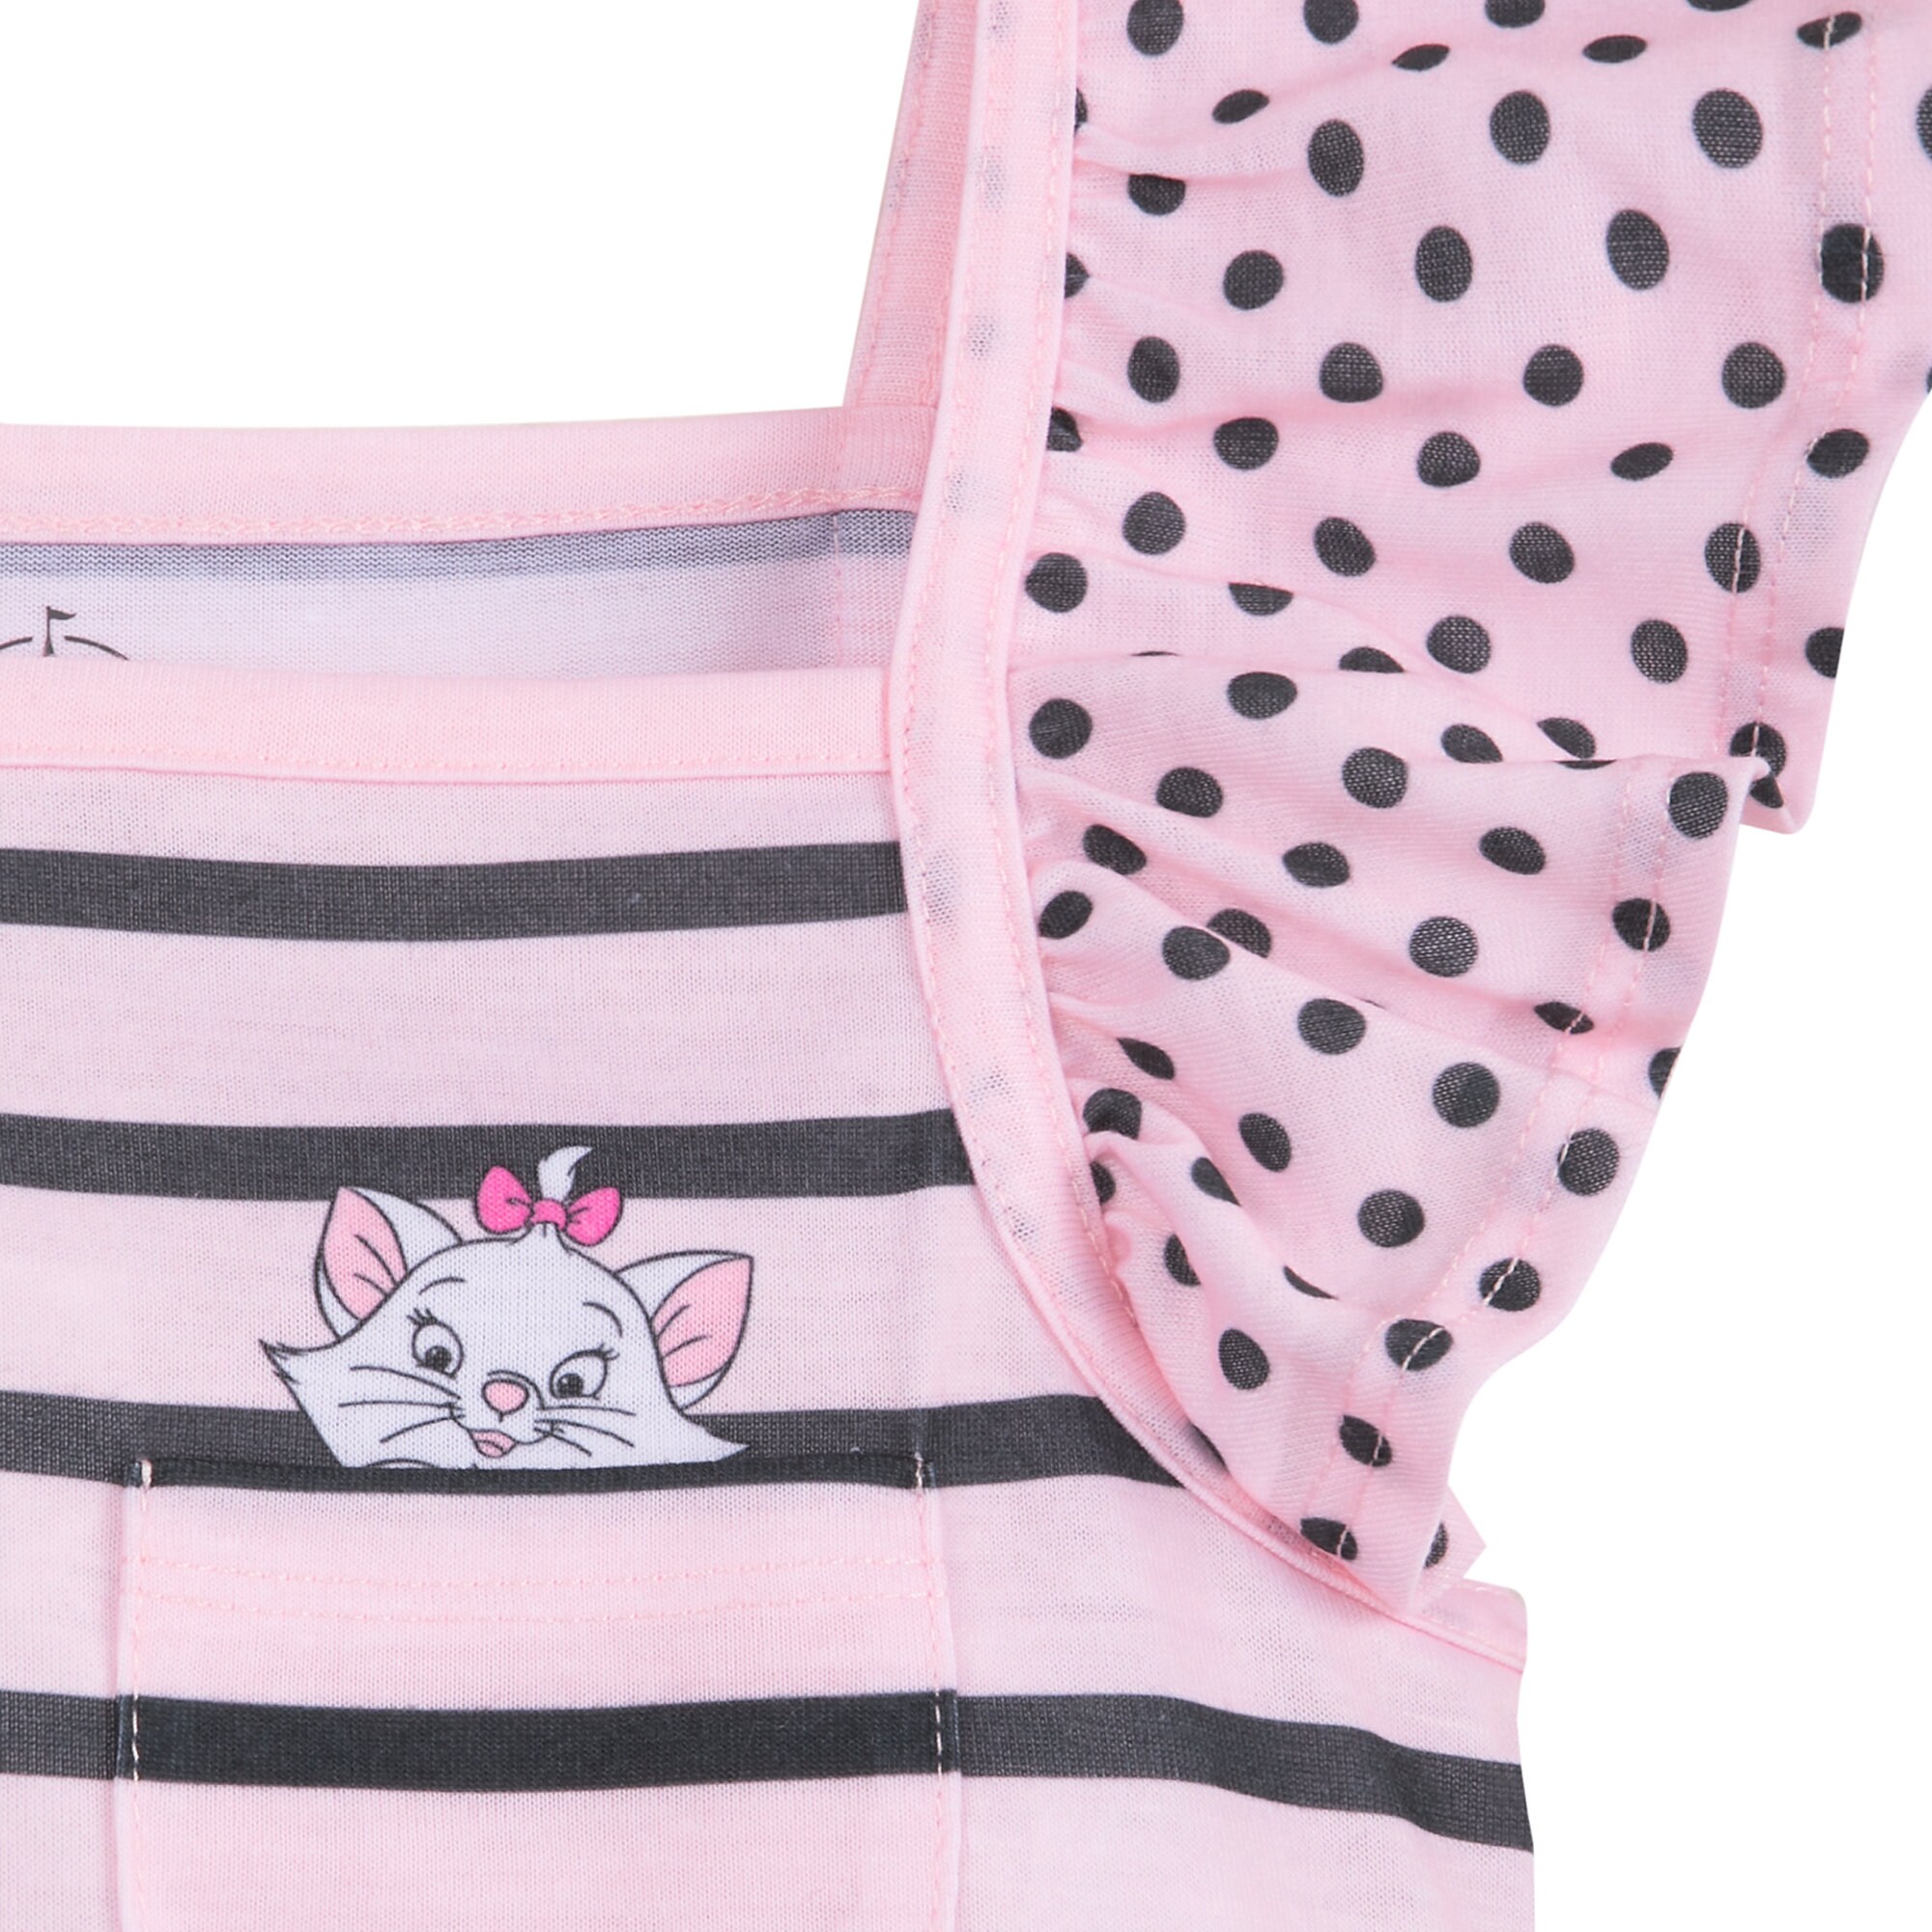 Marie Nightshirt for Girls - The Aristocats